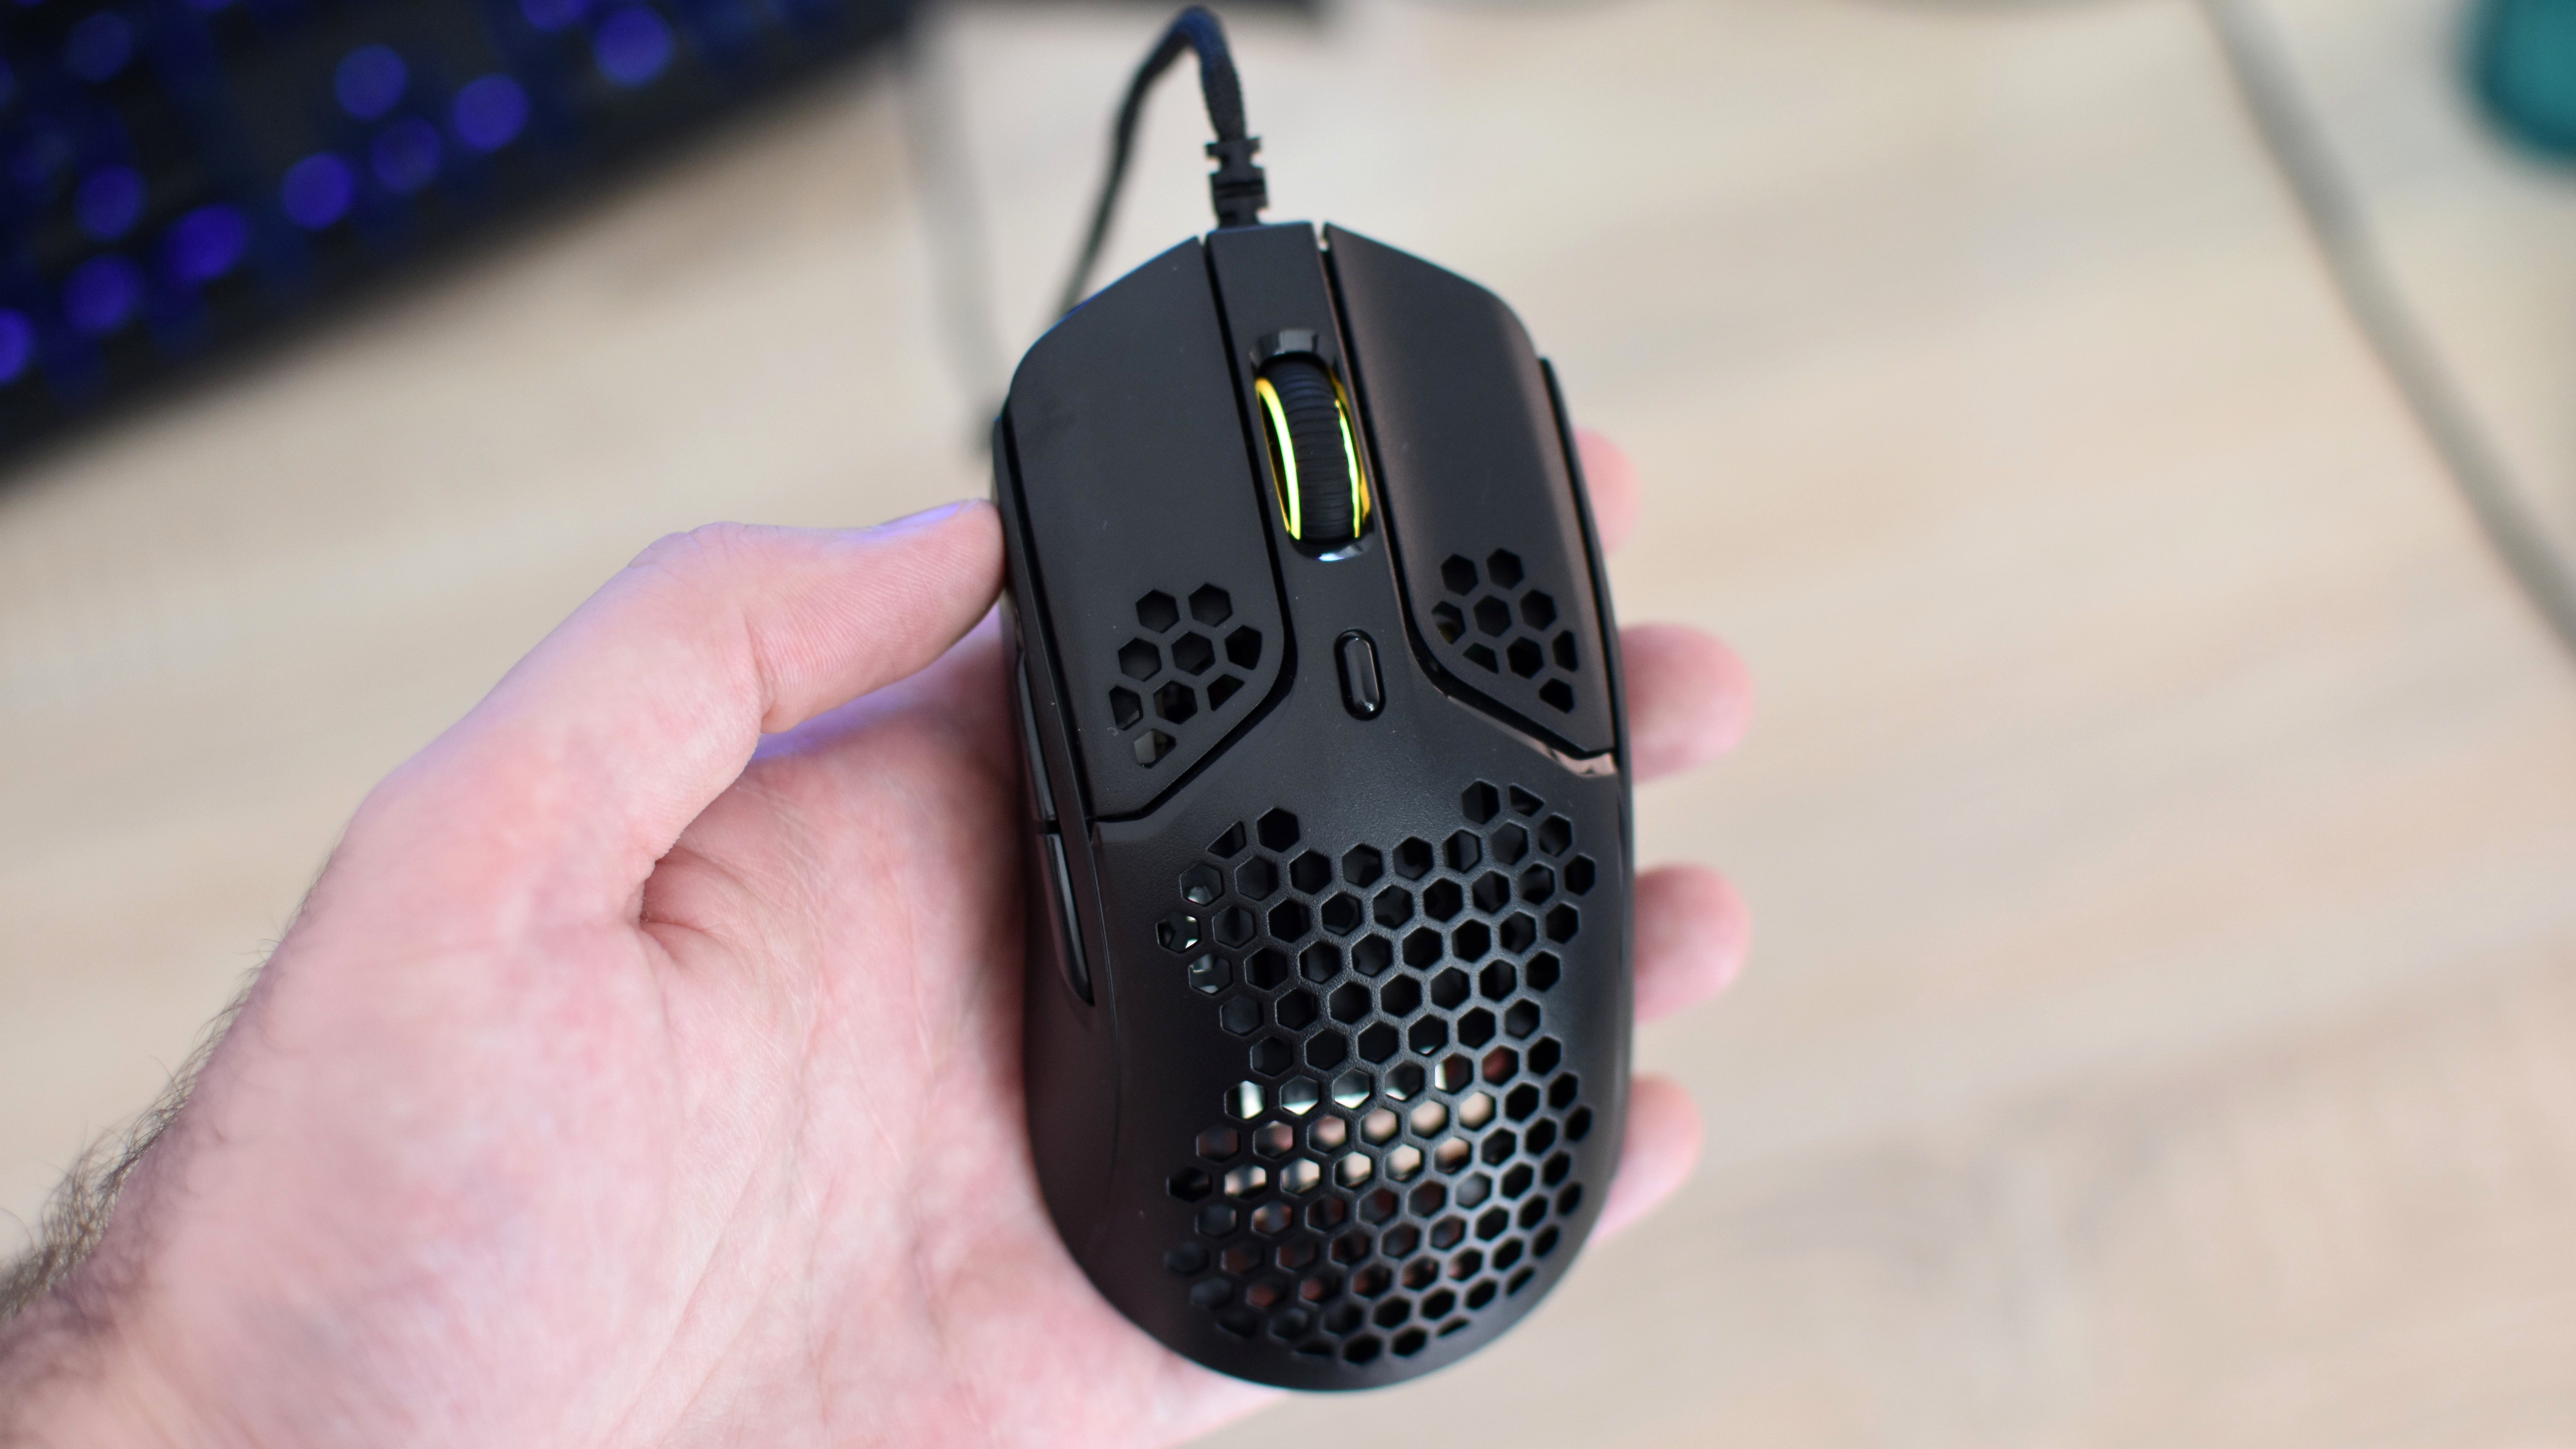 A photo of the HyperX Pulsefire Haste gaming mouse.